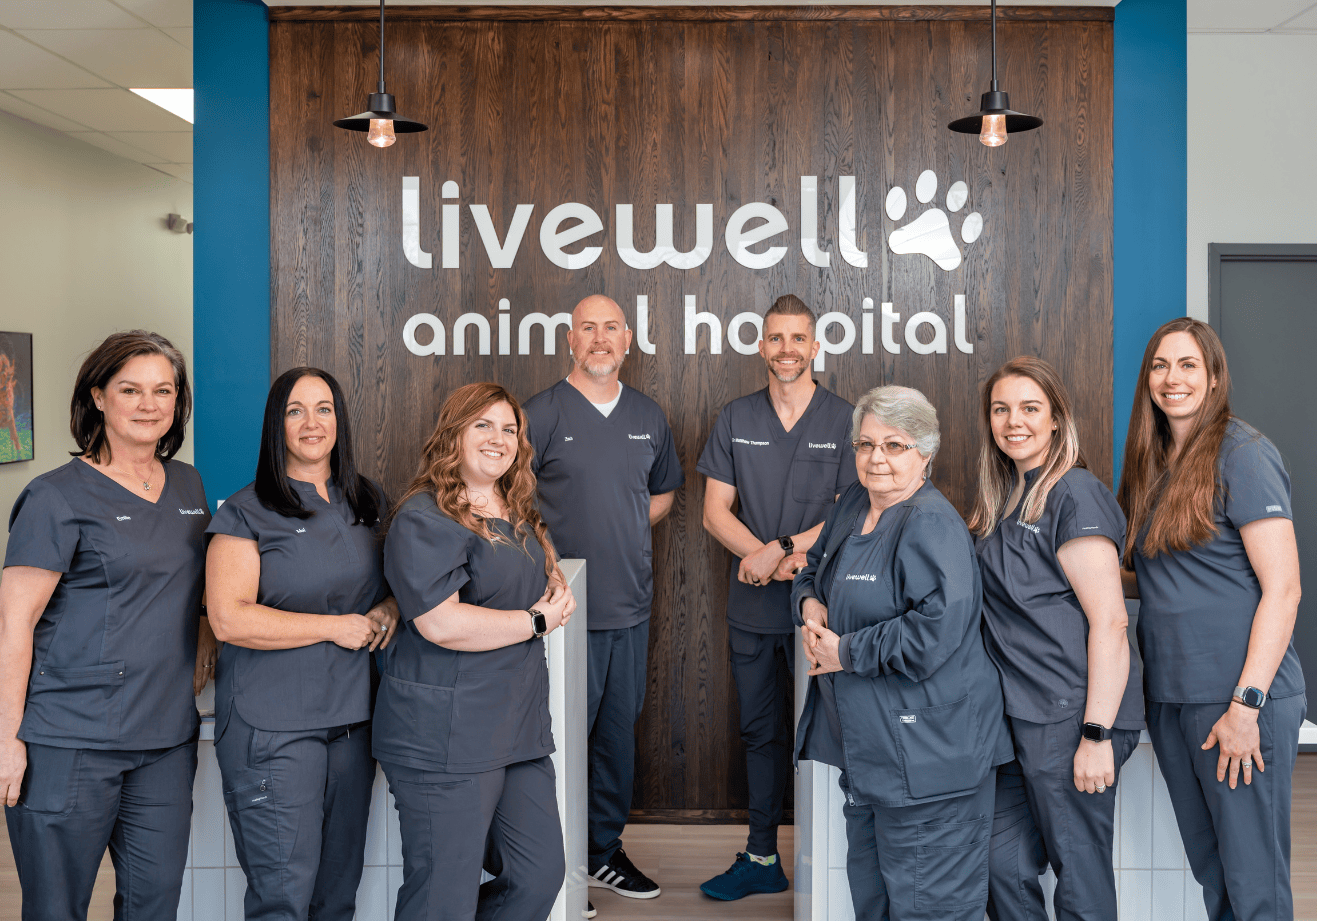 Entire staff of Livewell Animal Hospital of Anchorage gathered around receptionist area posing